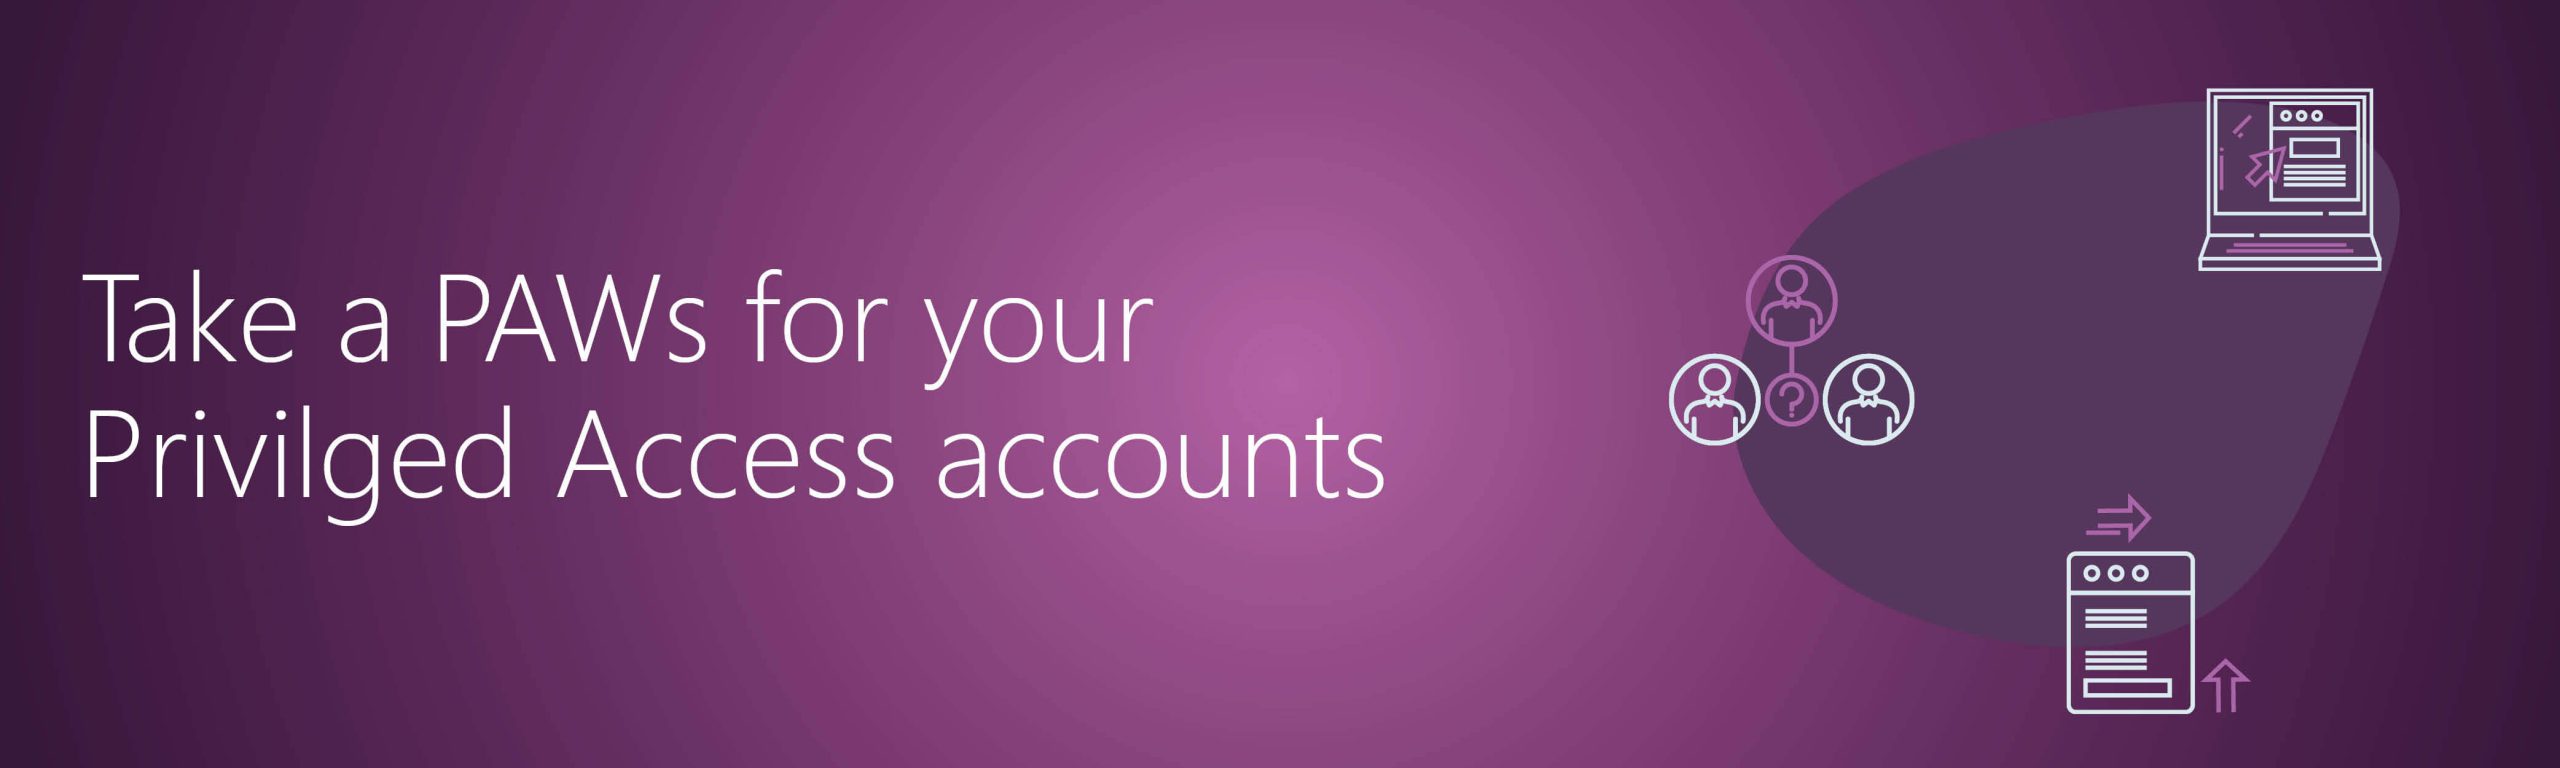 Take a PAWs for your Privileged Accounts website banner